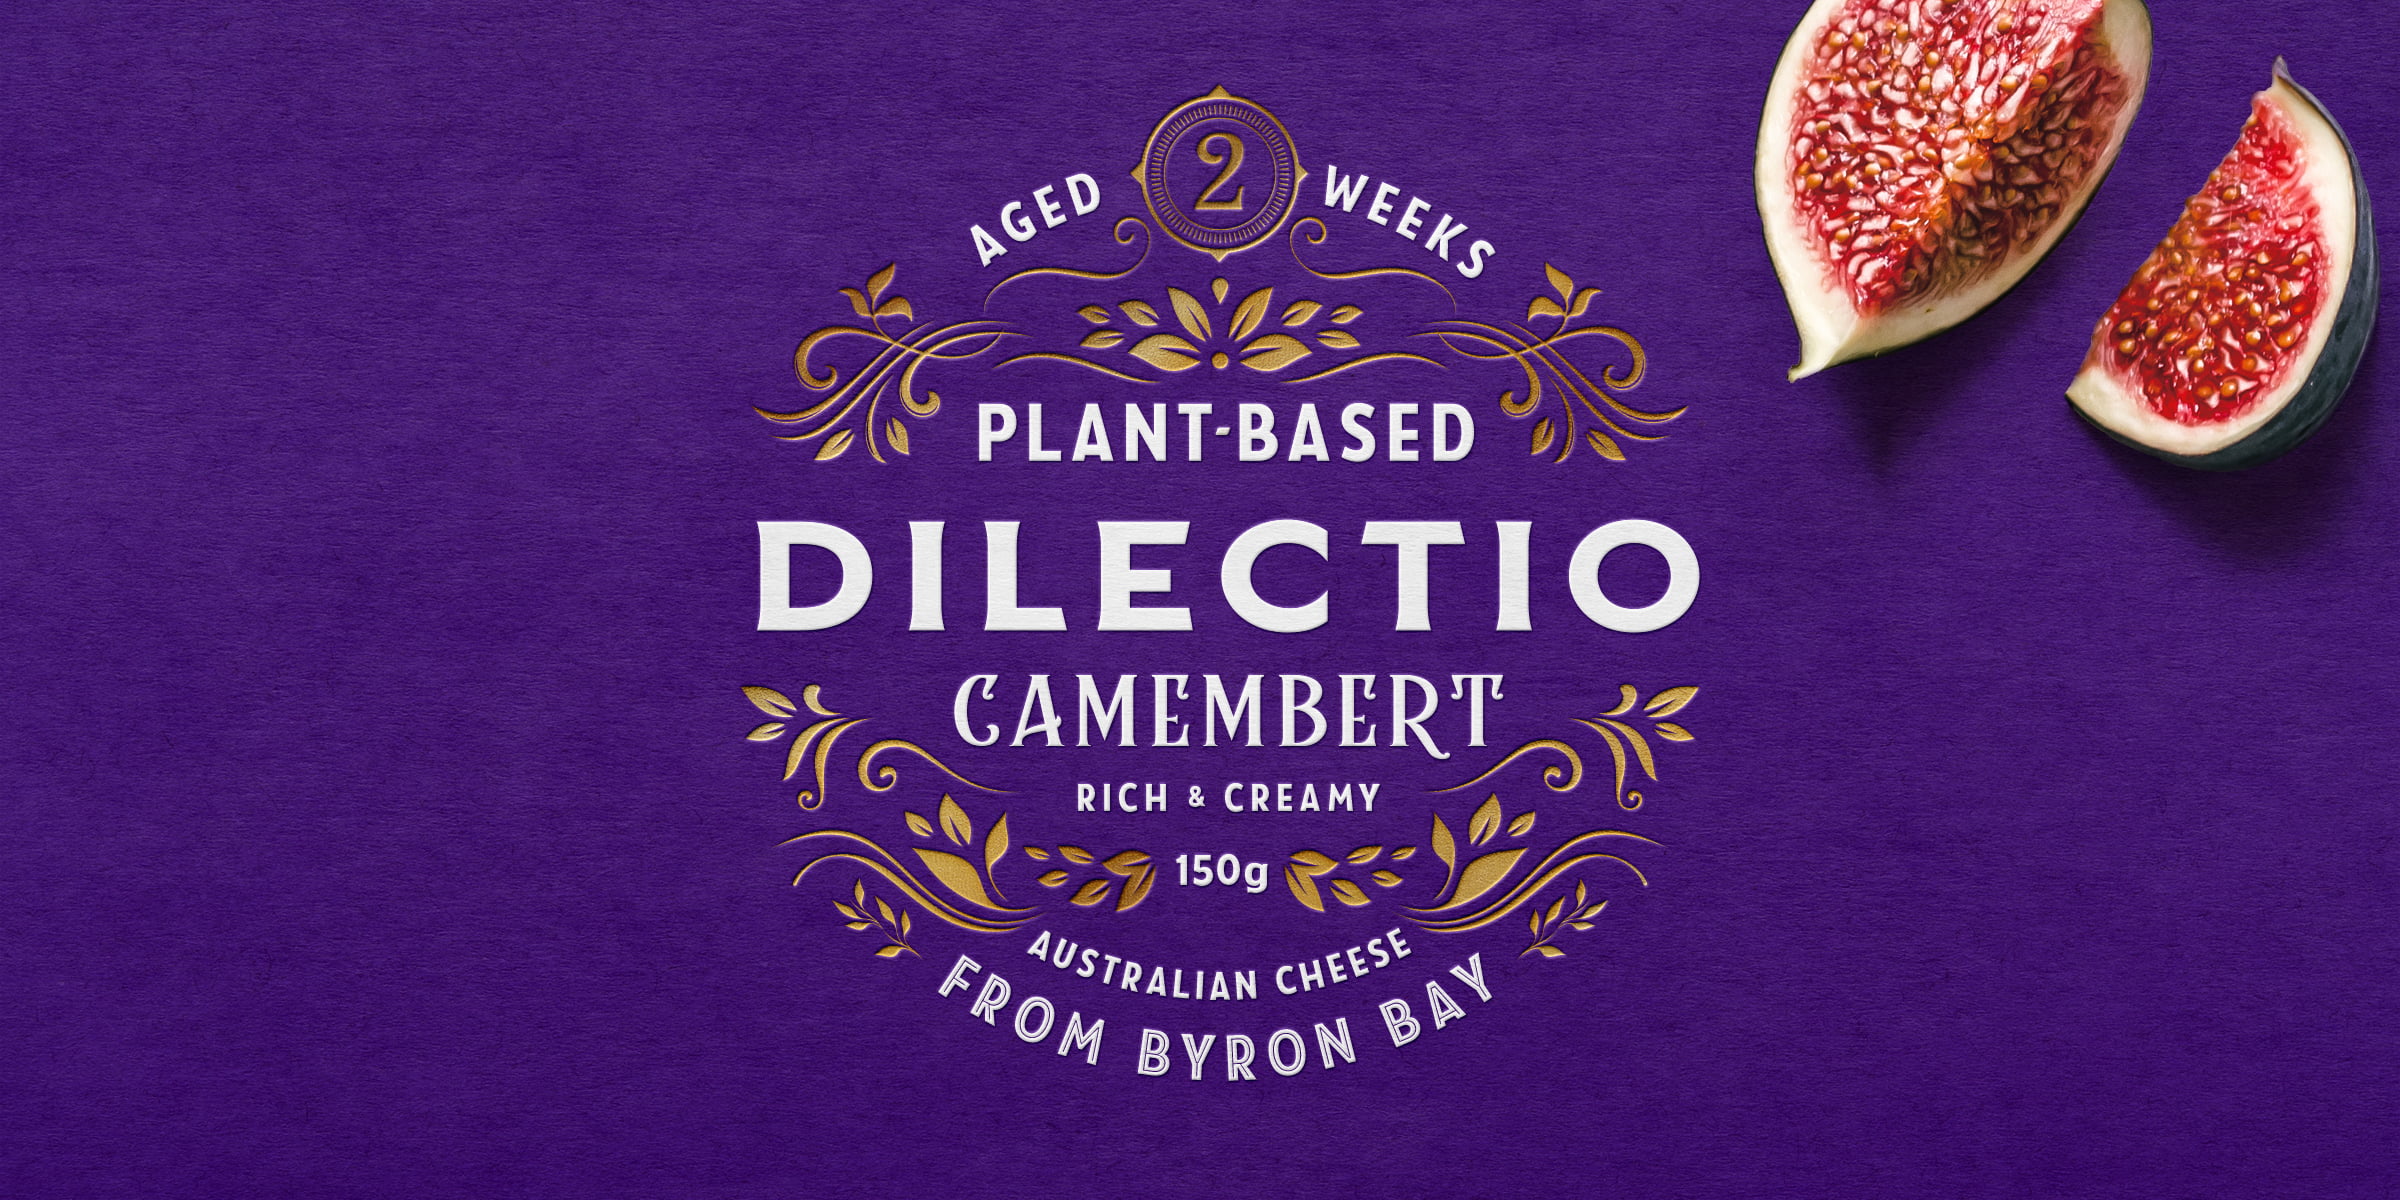 dilectio-cheese-plant-based-dairy-design-packaging-branding-purple-refresh